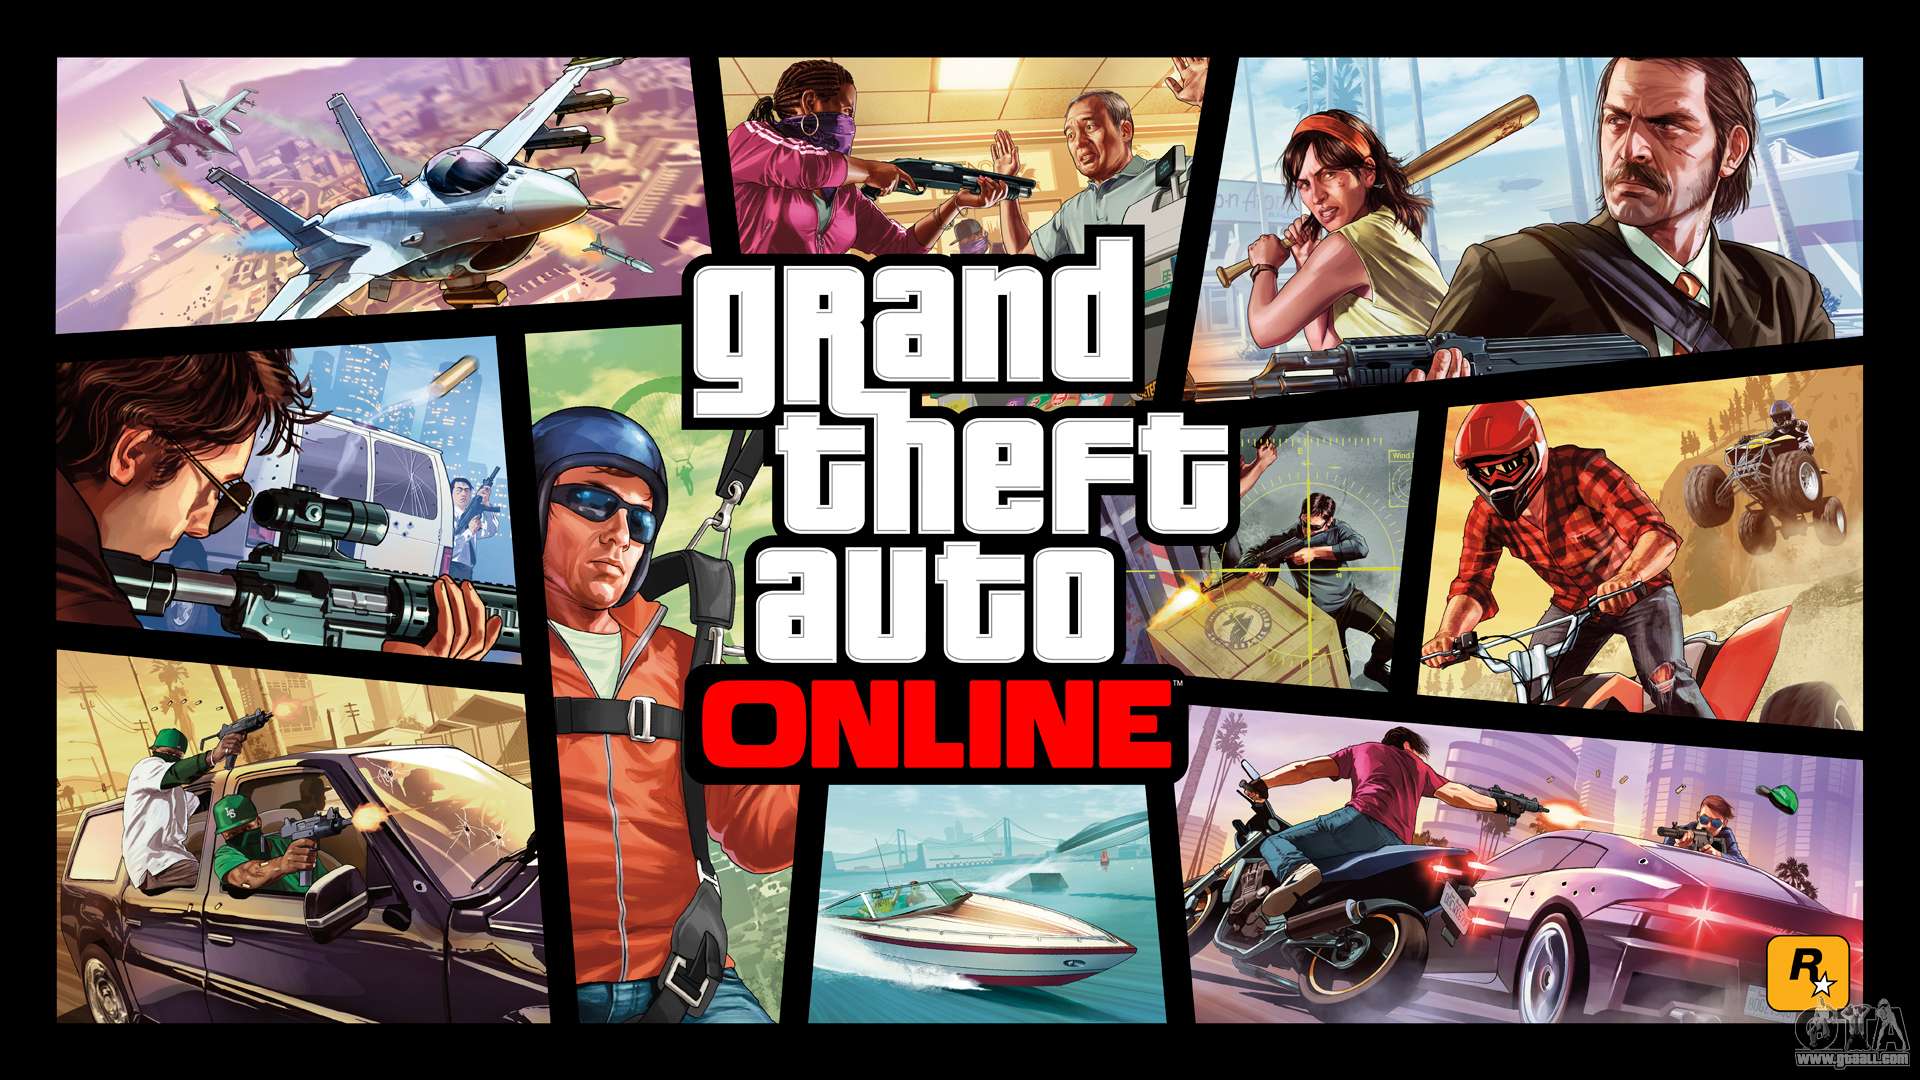 GTA 5 PC: system requirements and news, cheat codes and mods - 1920 x 1080 jpeg 280kB